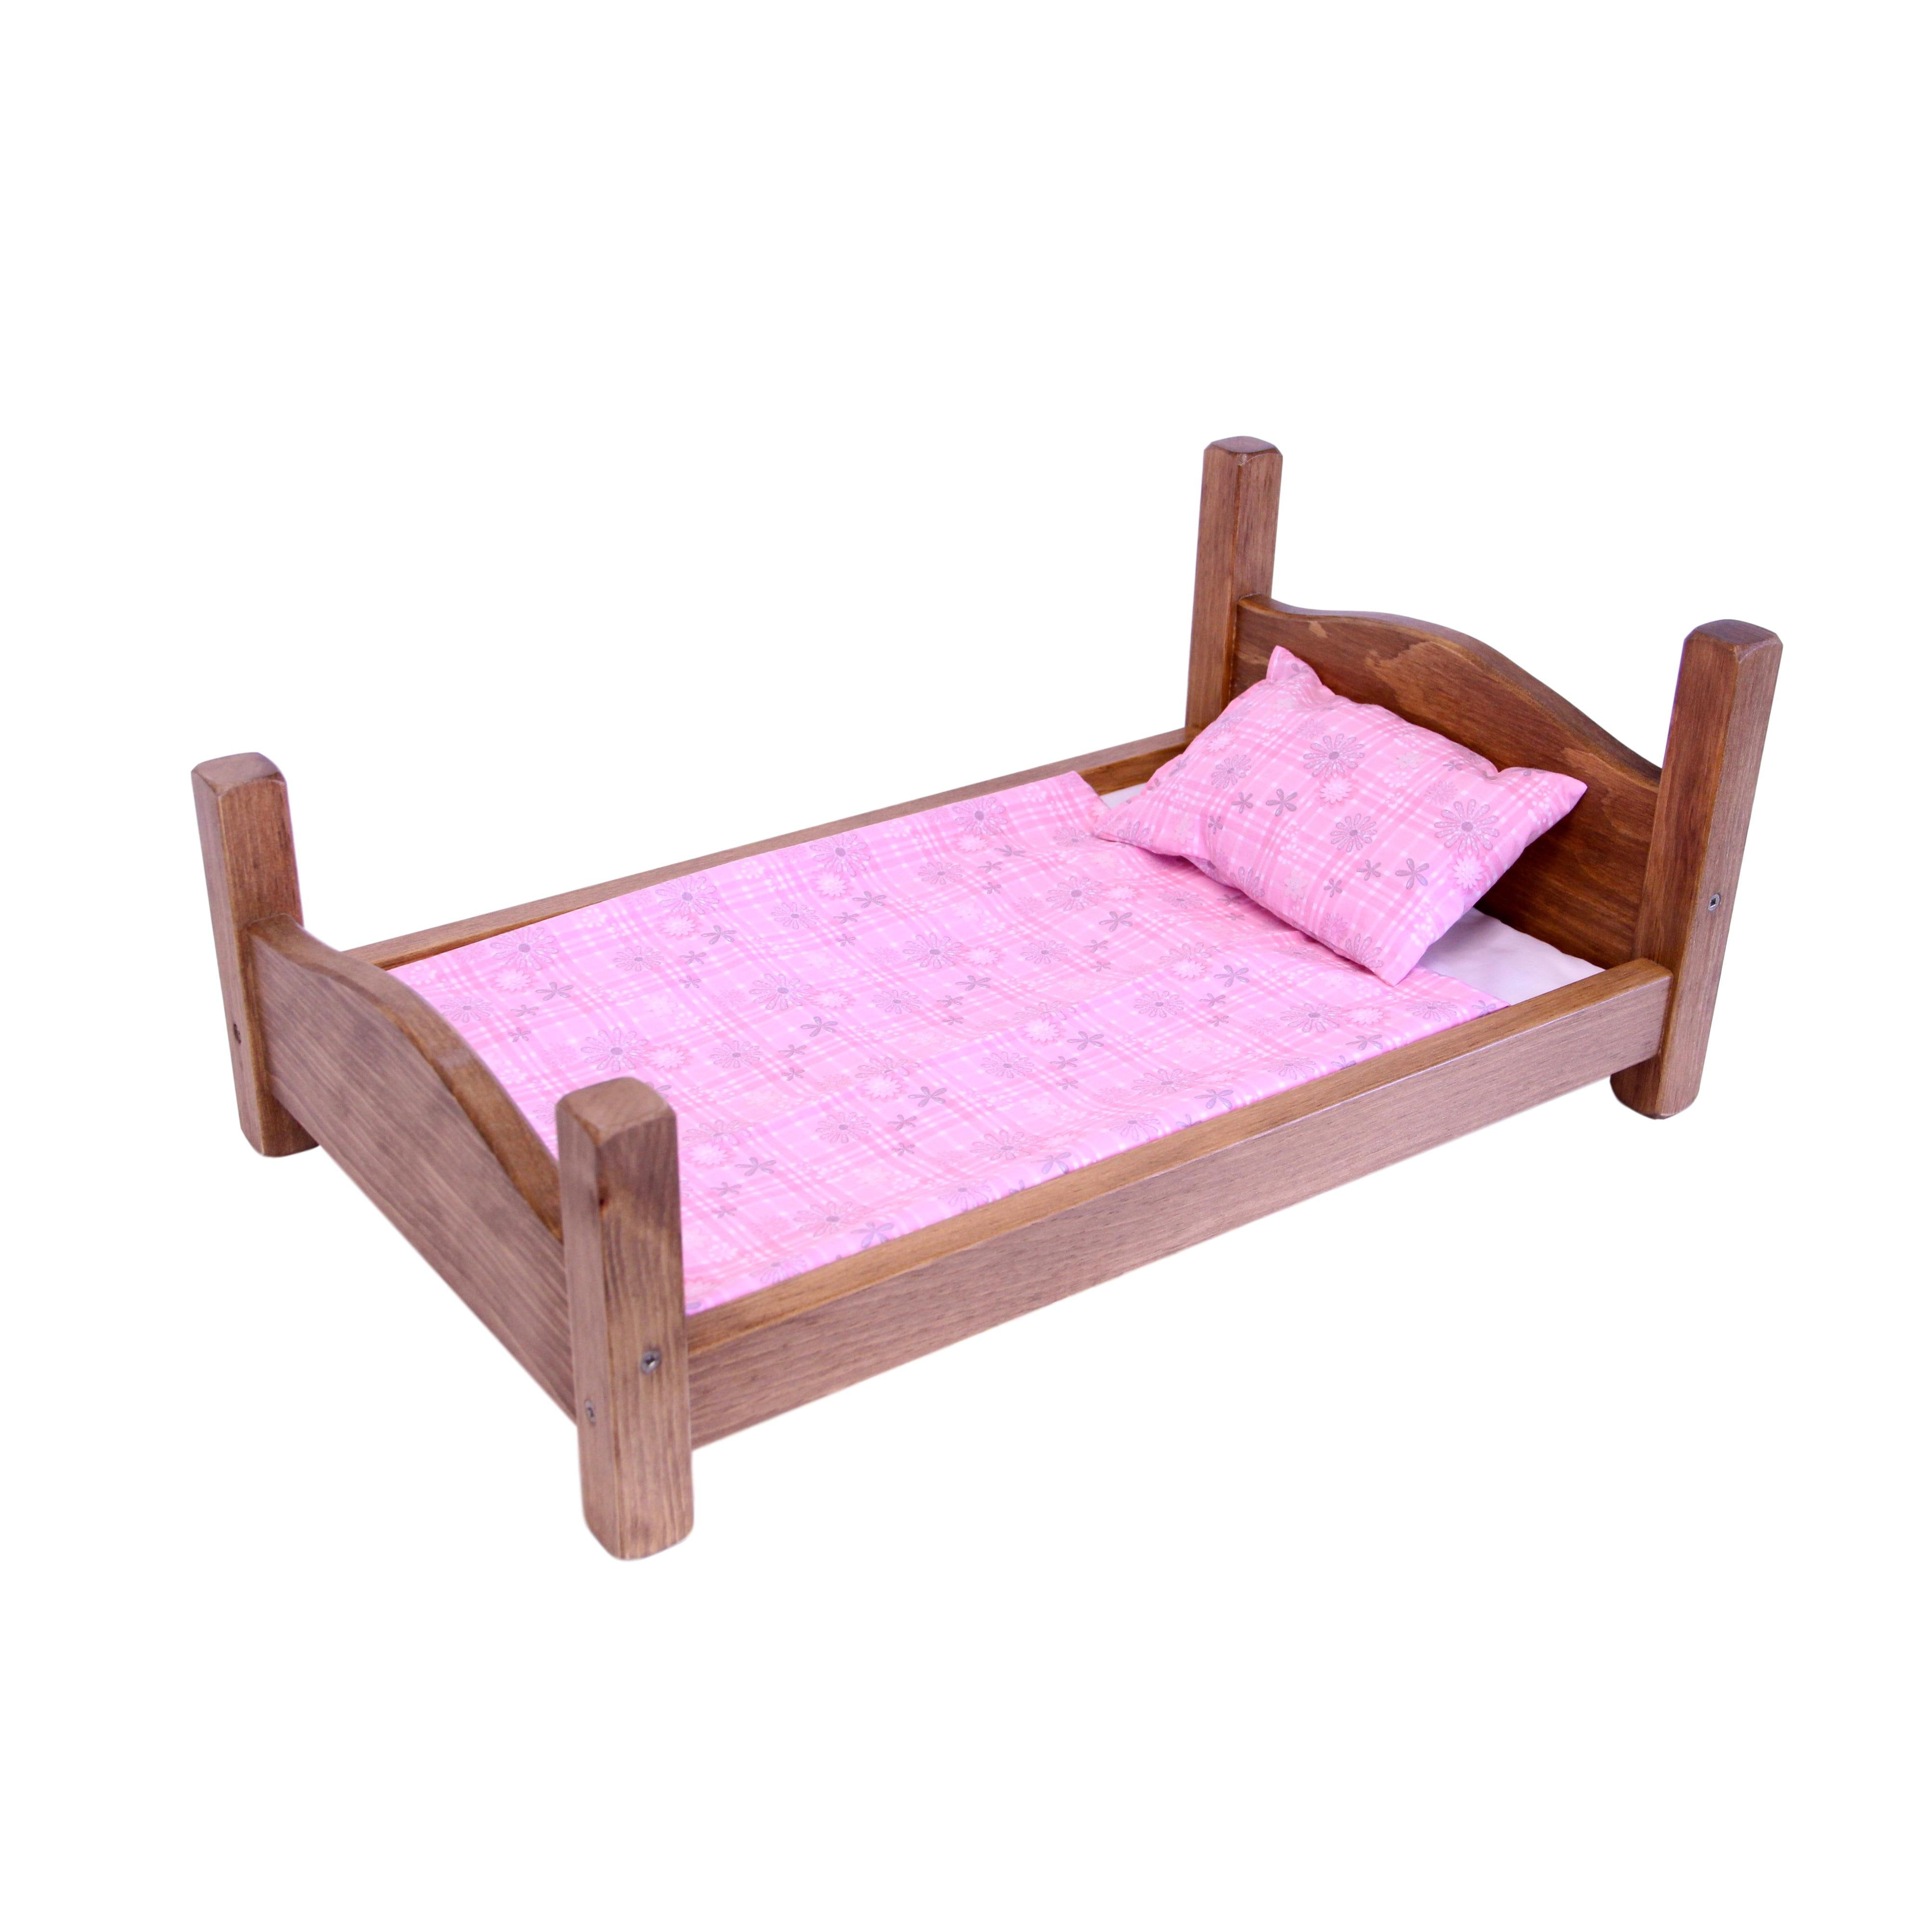 Wooden Doll Beds 